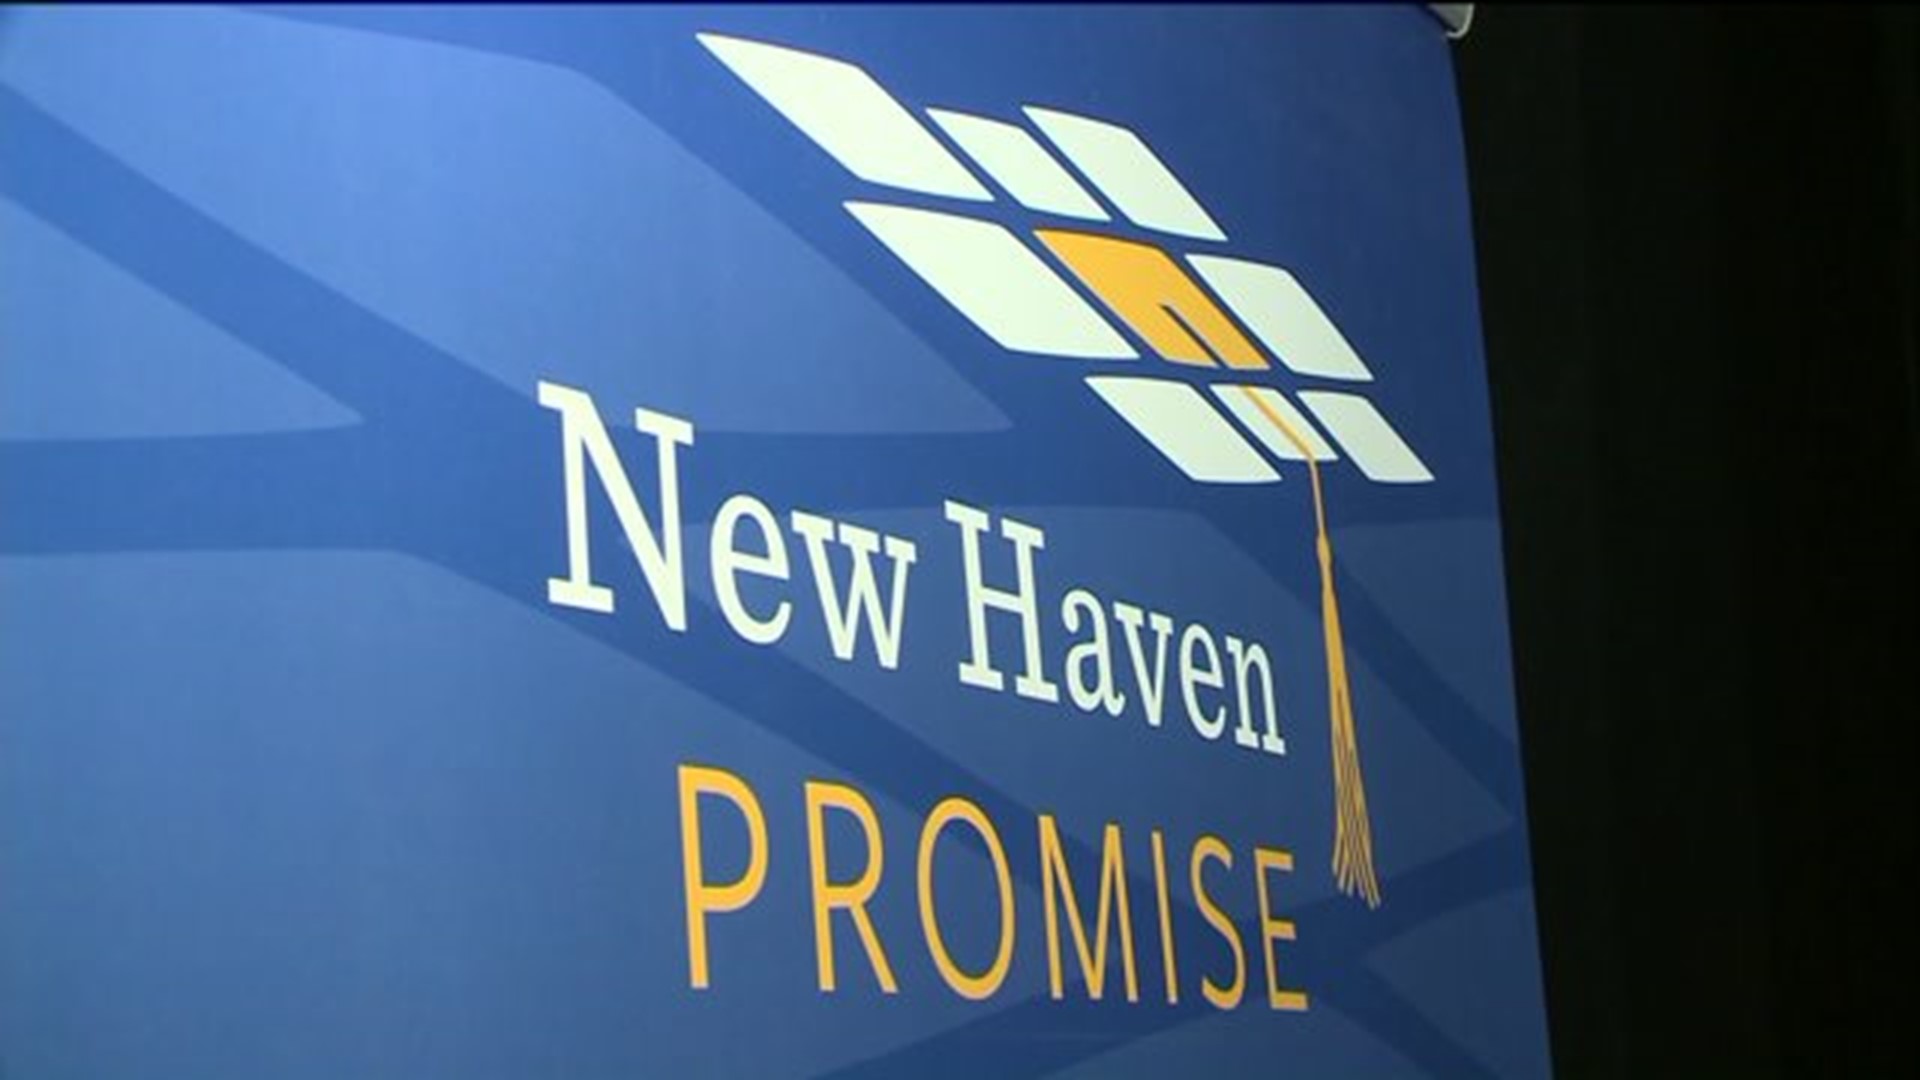 New Haven students look forward to college at UConn through incentive program